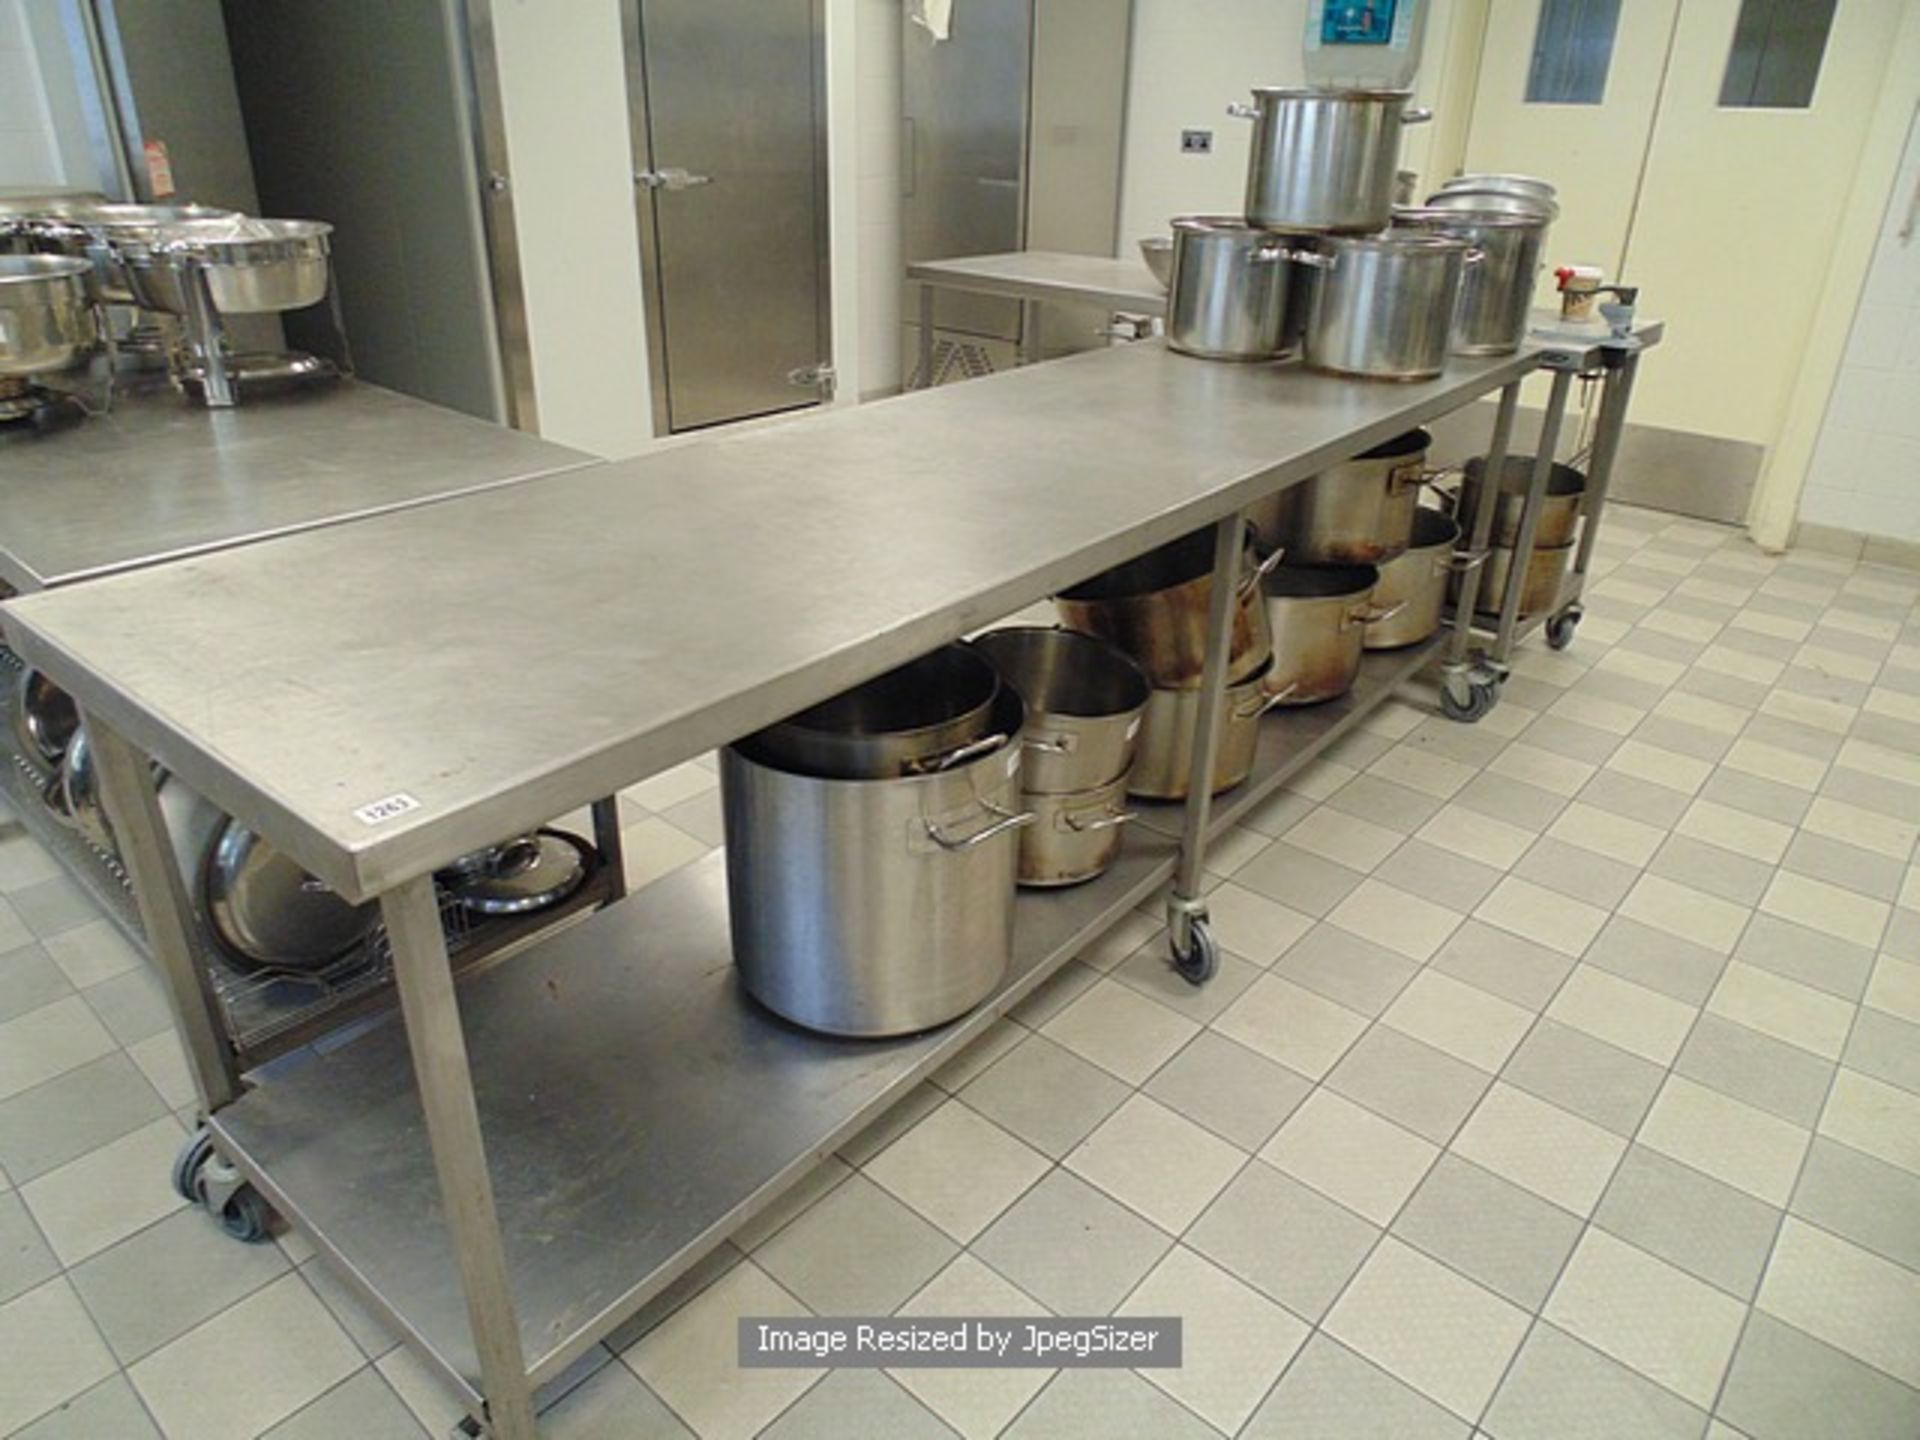 Moffat stainless steel mobile preparation table with under shelf 2700mm x 690mm x 900mm  Lift out